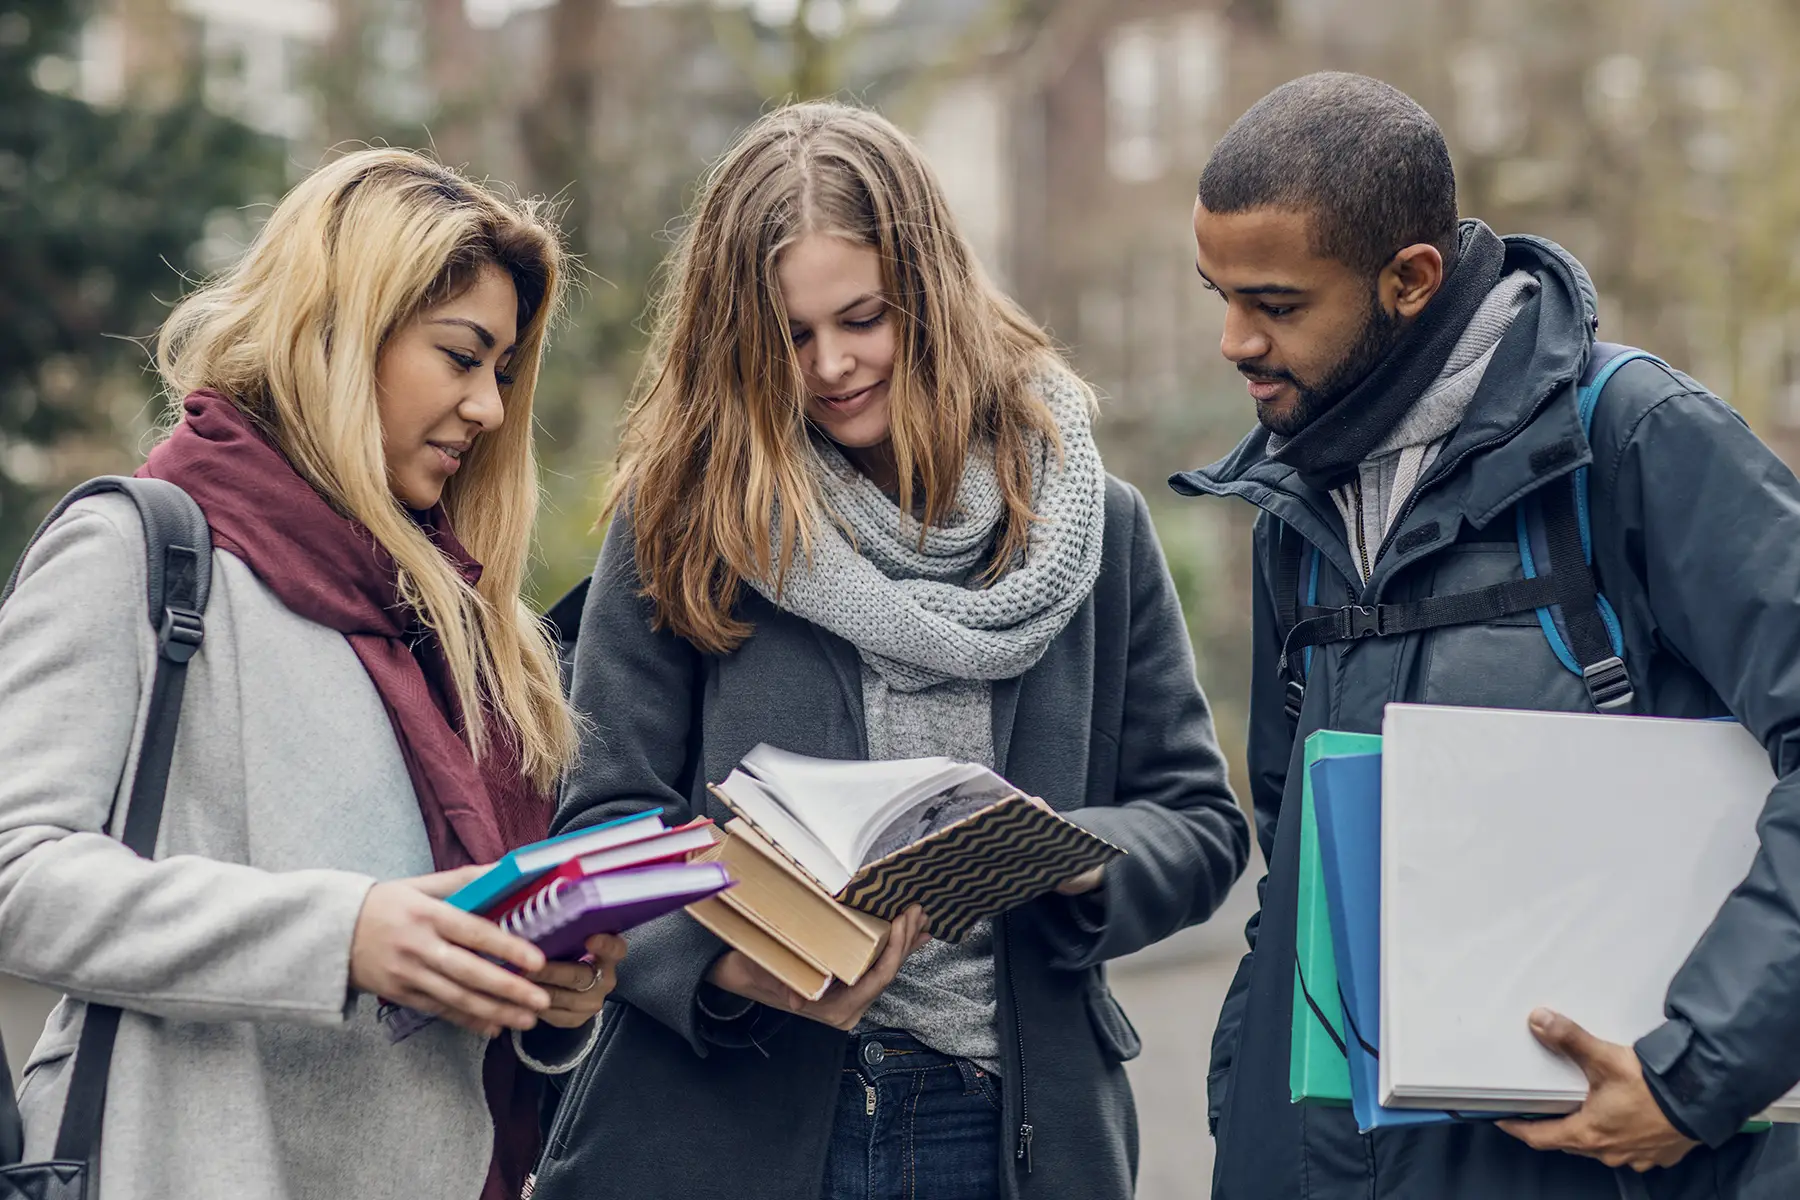 Three students standing in a row, looking at books together